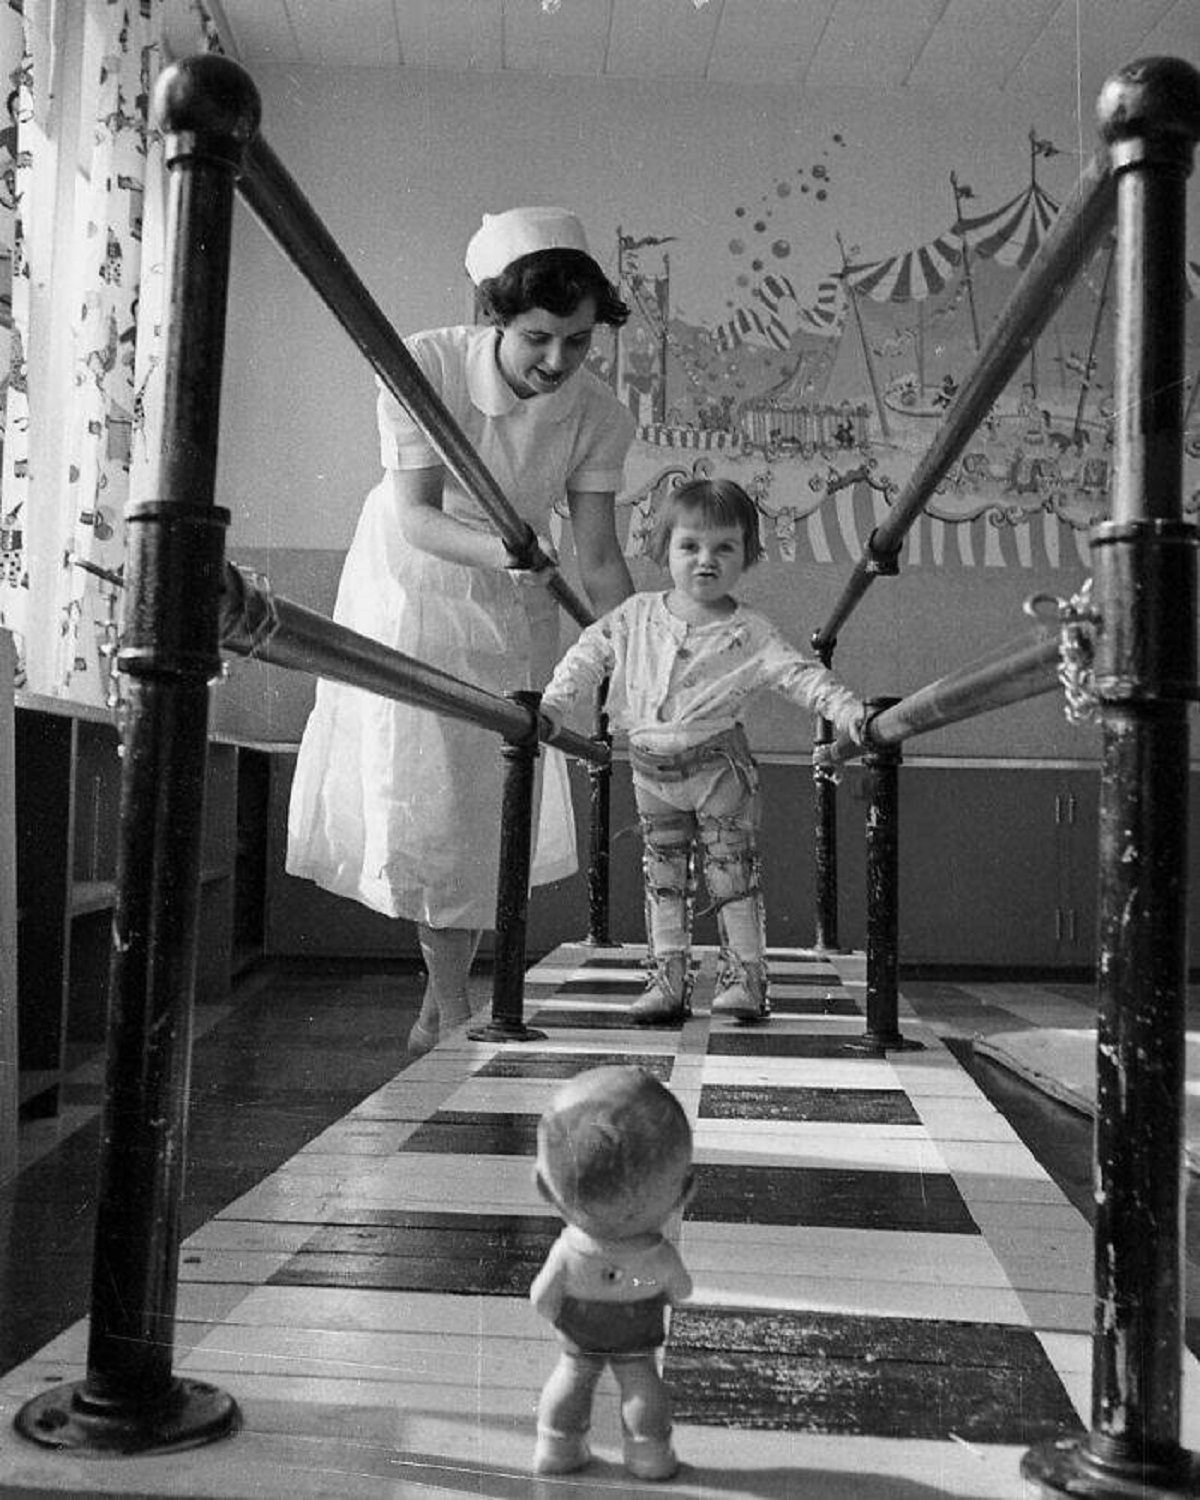 Walking practice at the polio hospital, 1953.